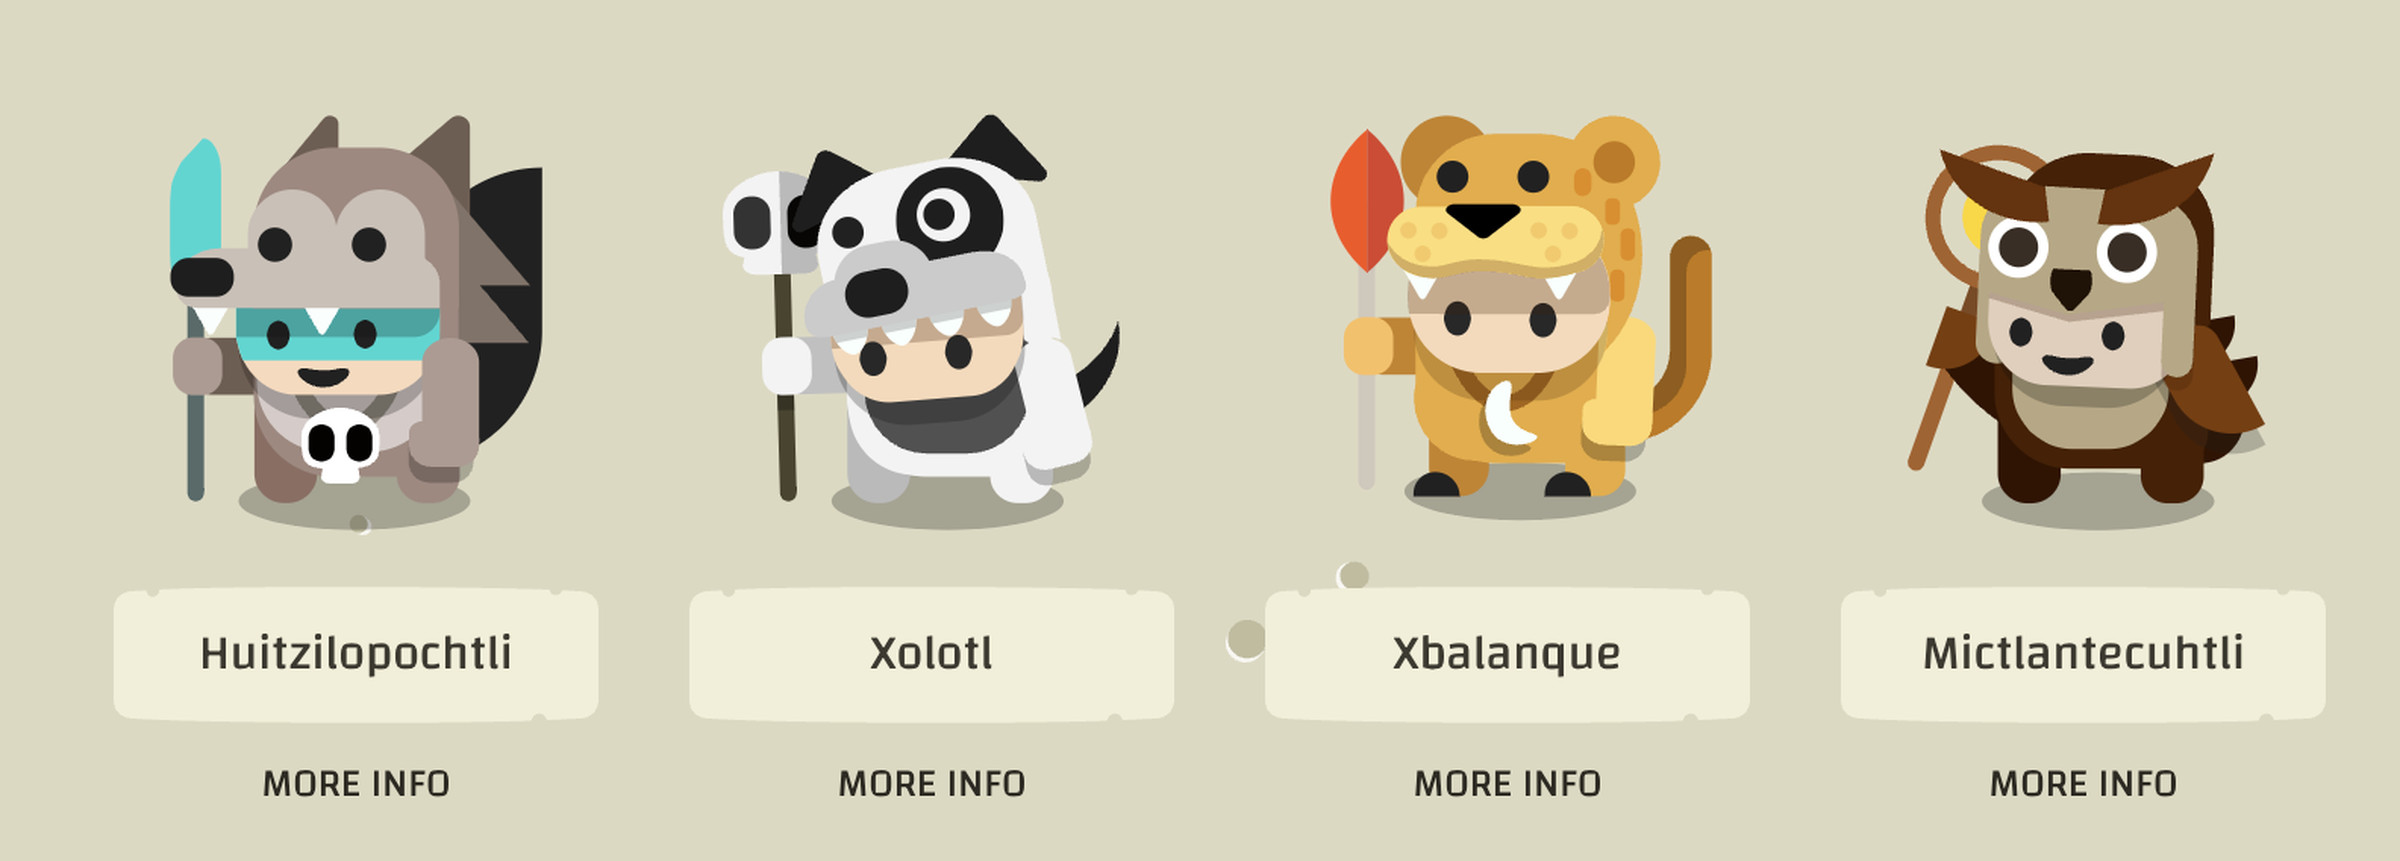 The four playable characters in Google’s Descent of the Serpent. A cartoon character is in a disguise of each animal — a wolf, a dog, a jaguar, and an owl.